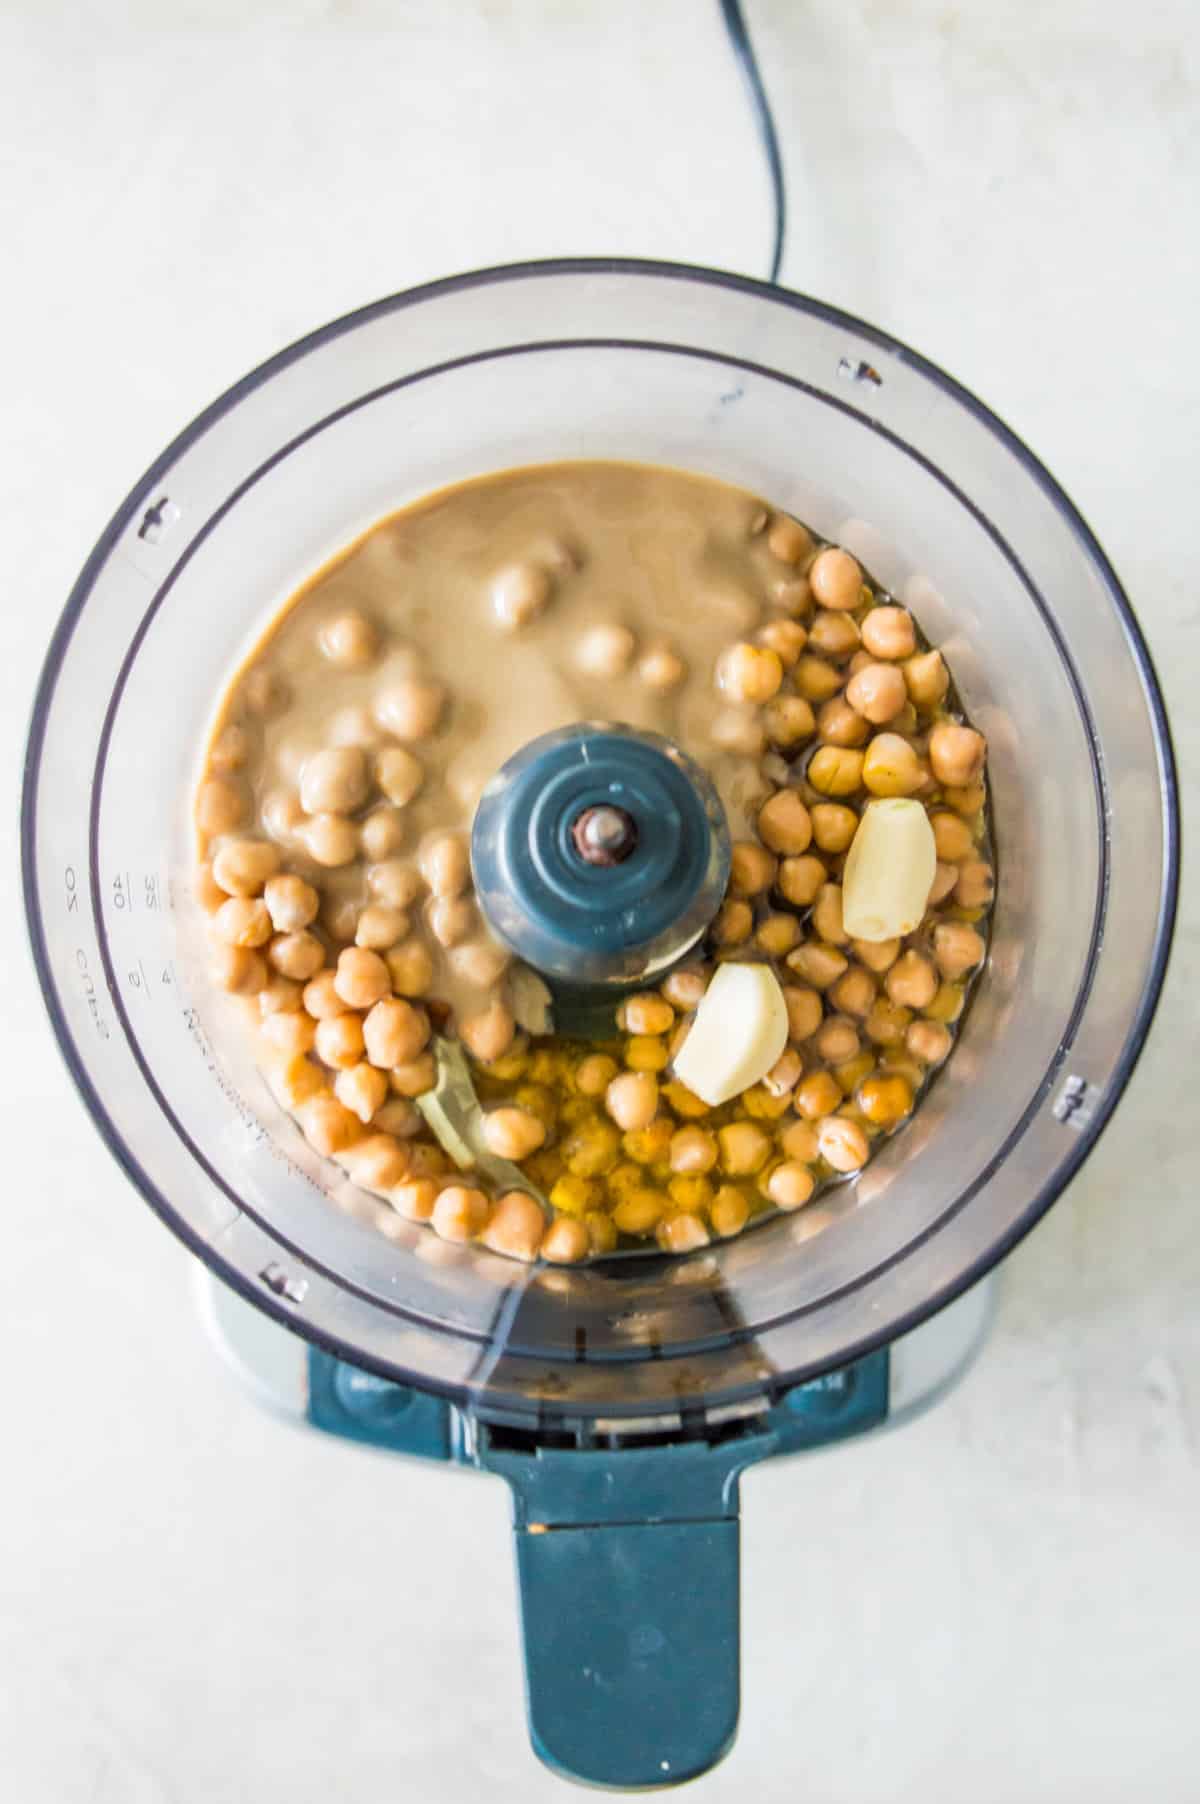 A food processor filled with ingredients for making hummus including chickpeas, oil, tahini, garlic cloves and spices.